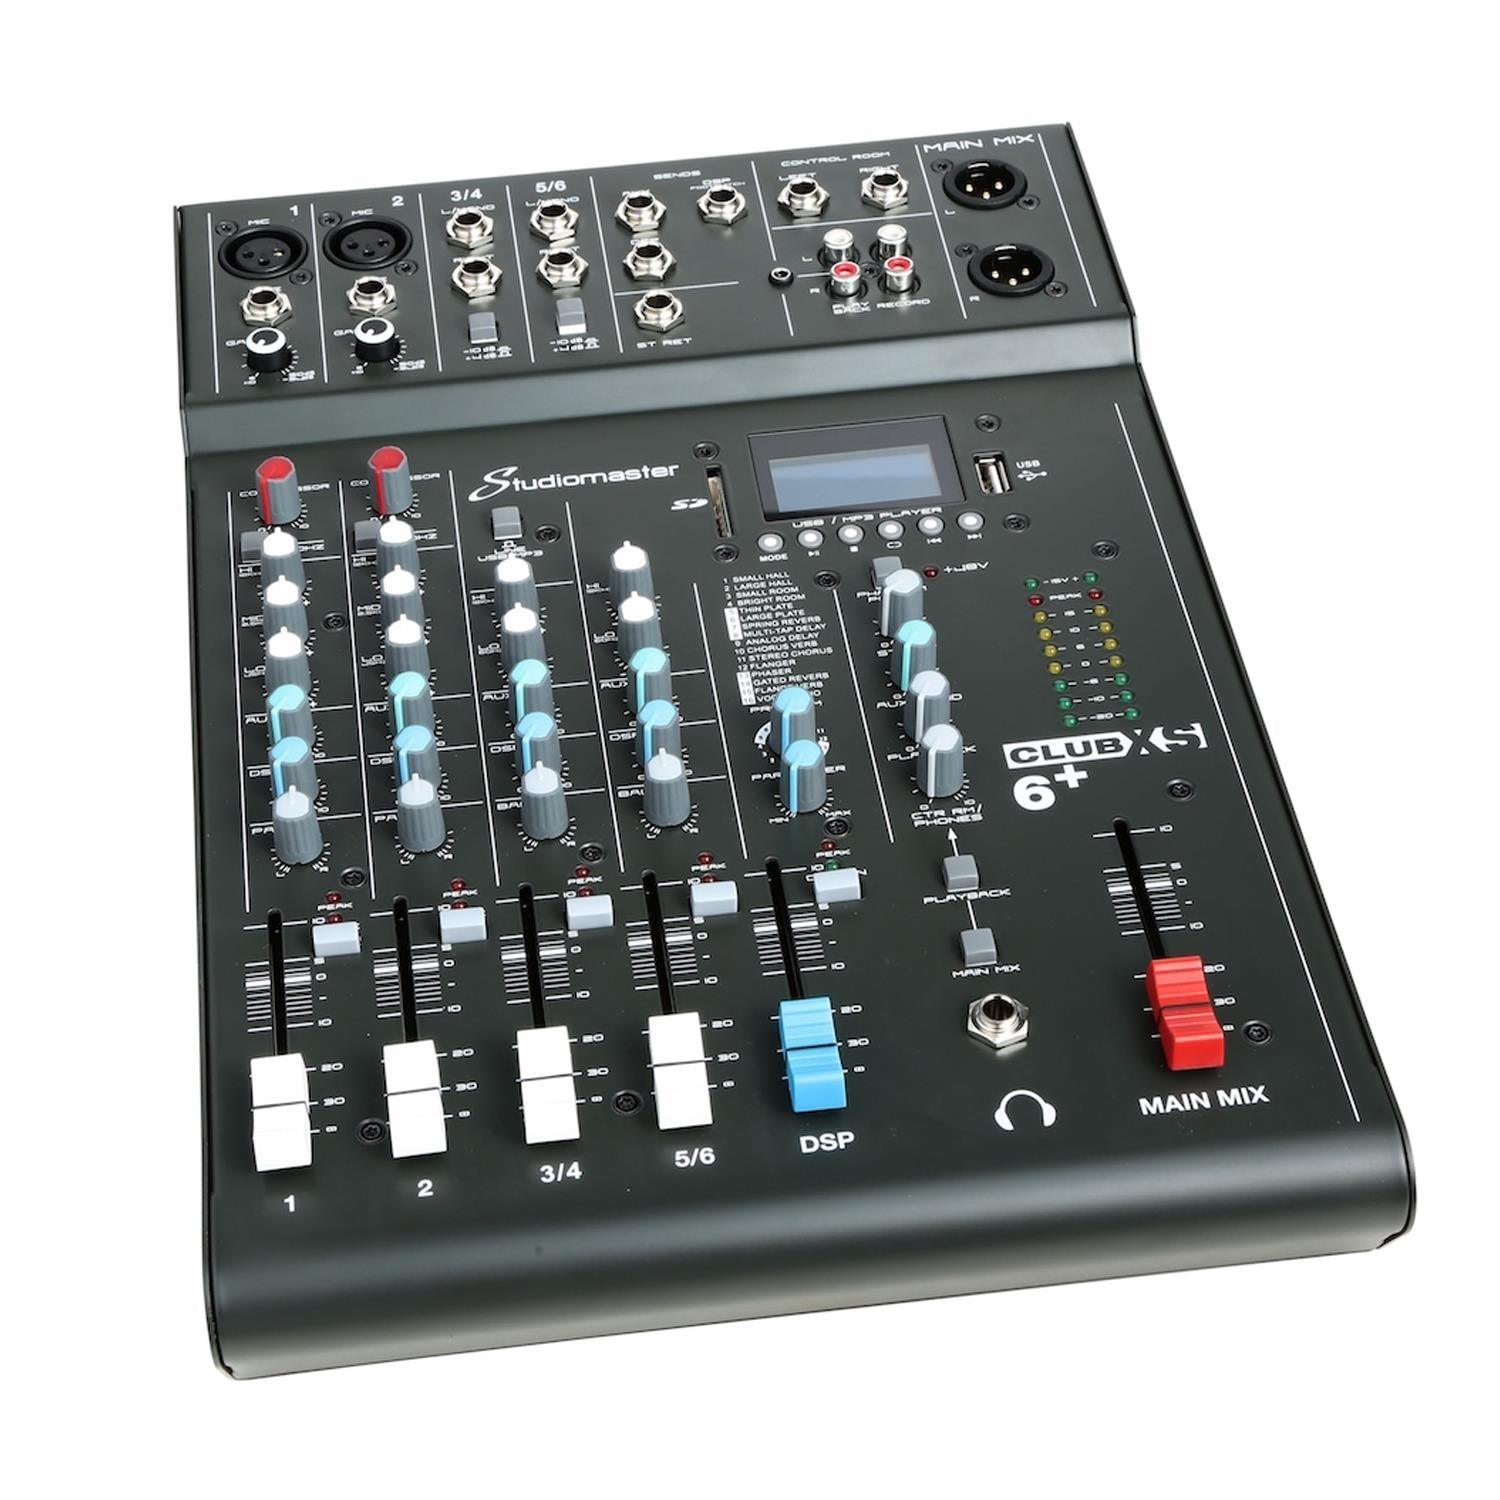 Studiomaster Club XS 6+ 4 Channel Mixing Desk - DY Pro Audio